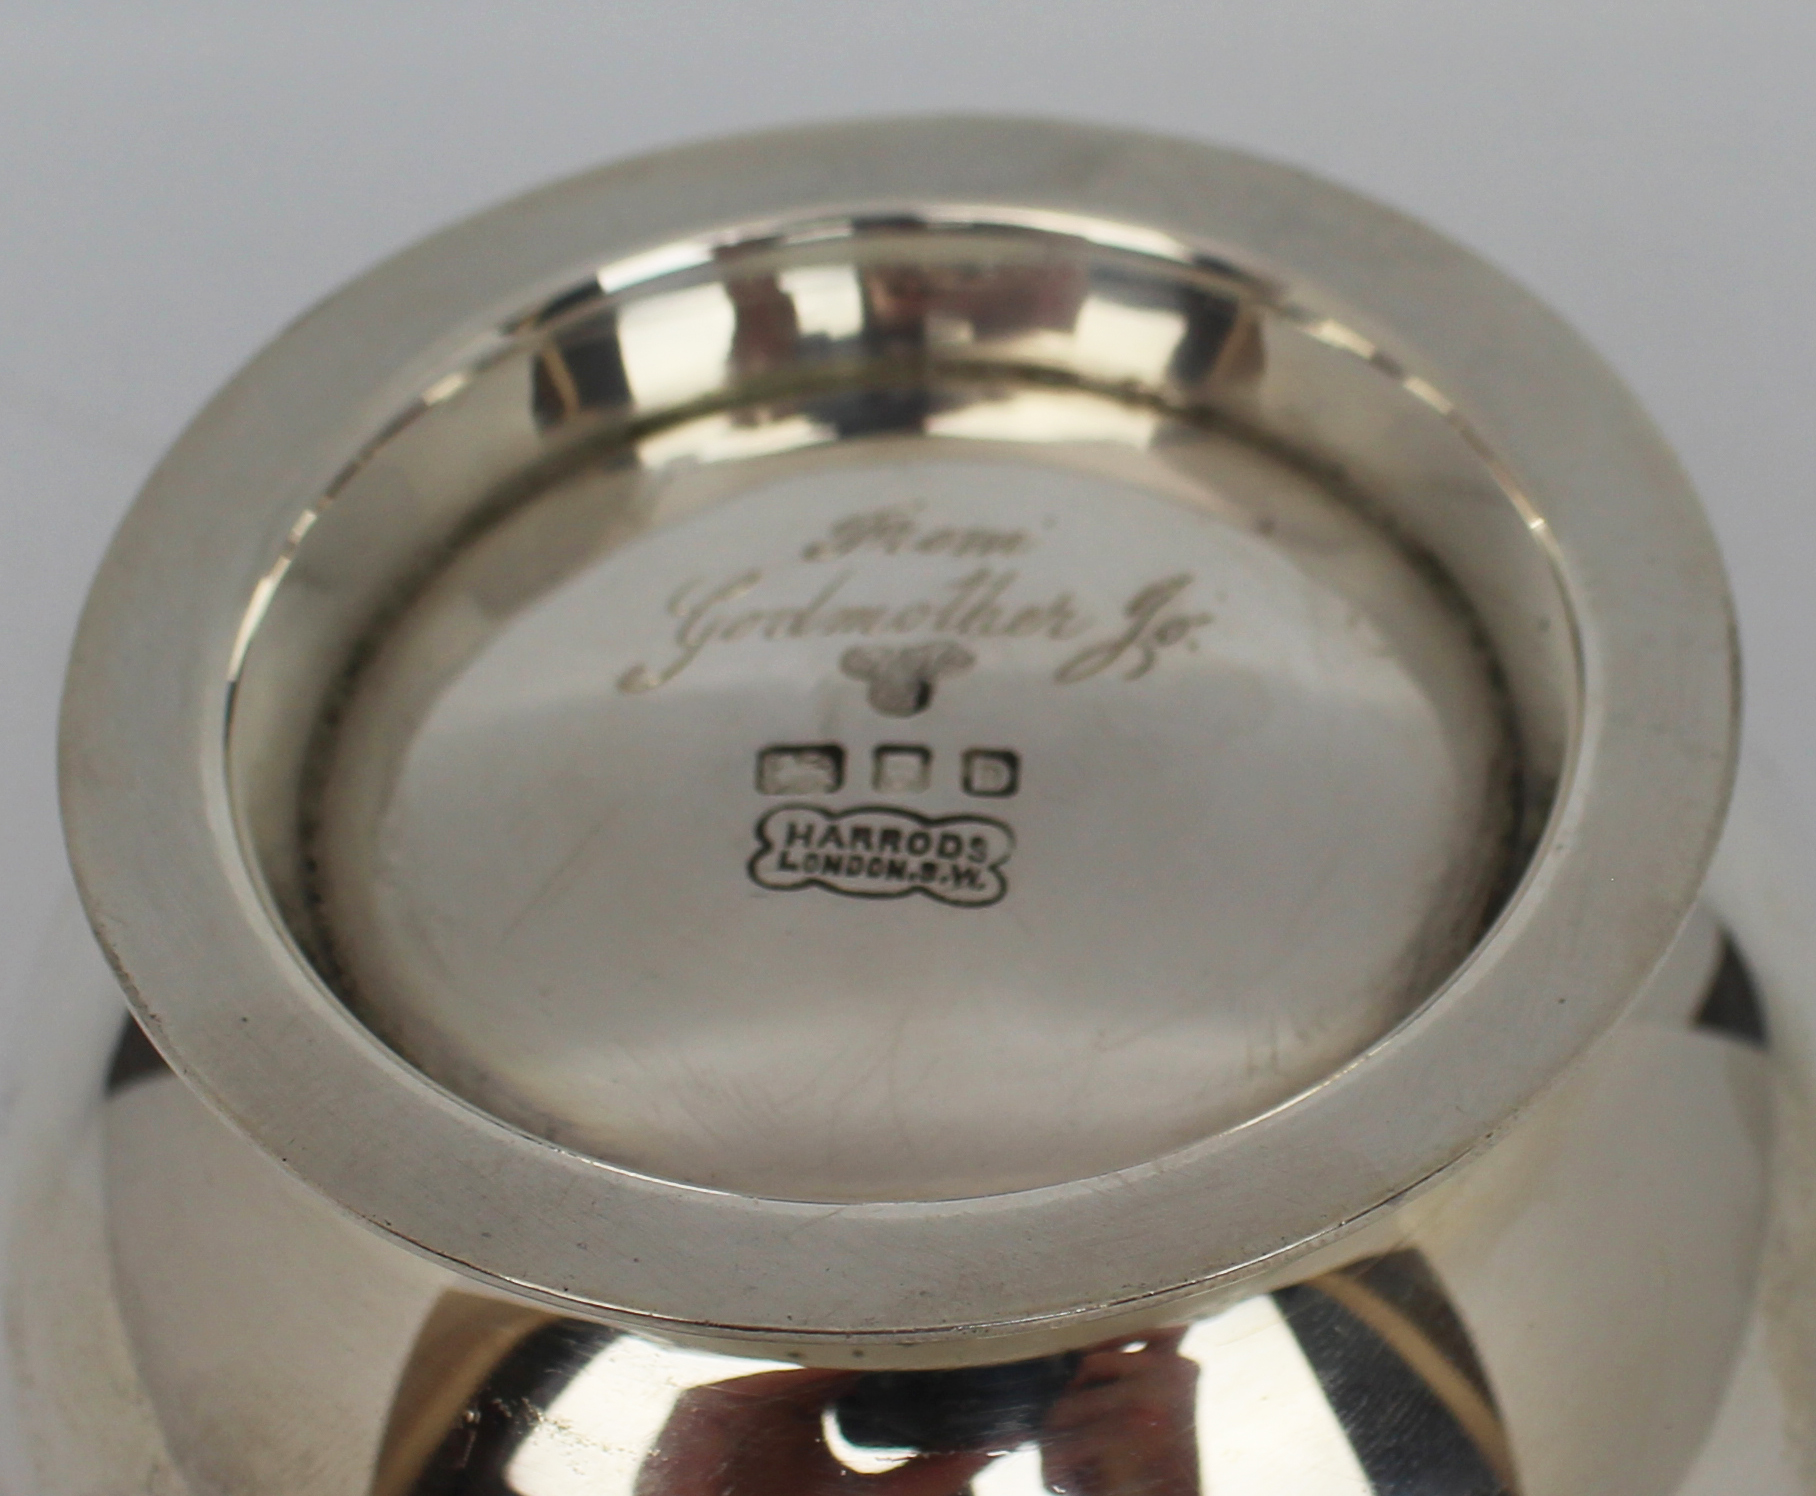 Solid Silver Bowl by Harrods London 1939 - Image 4 of 4